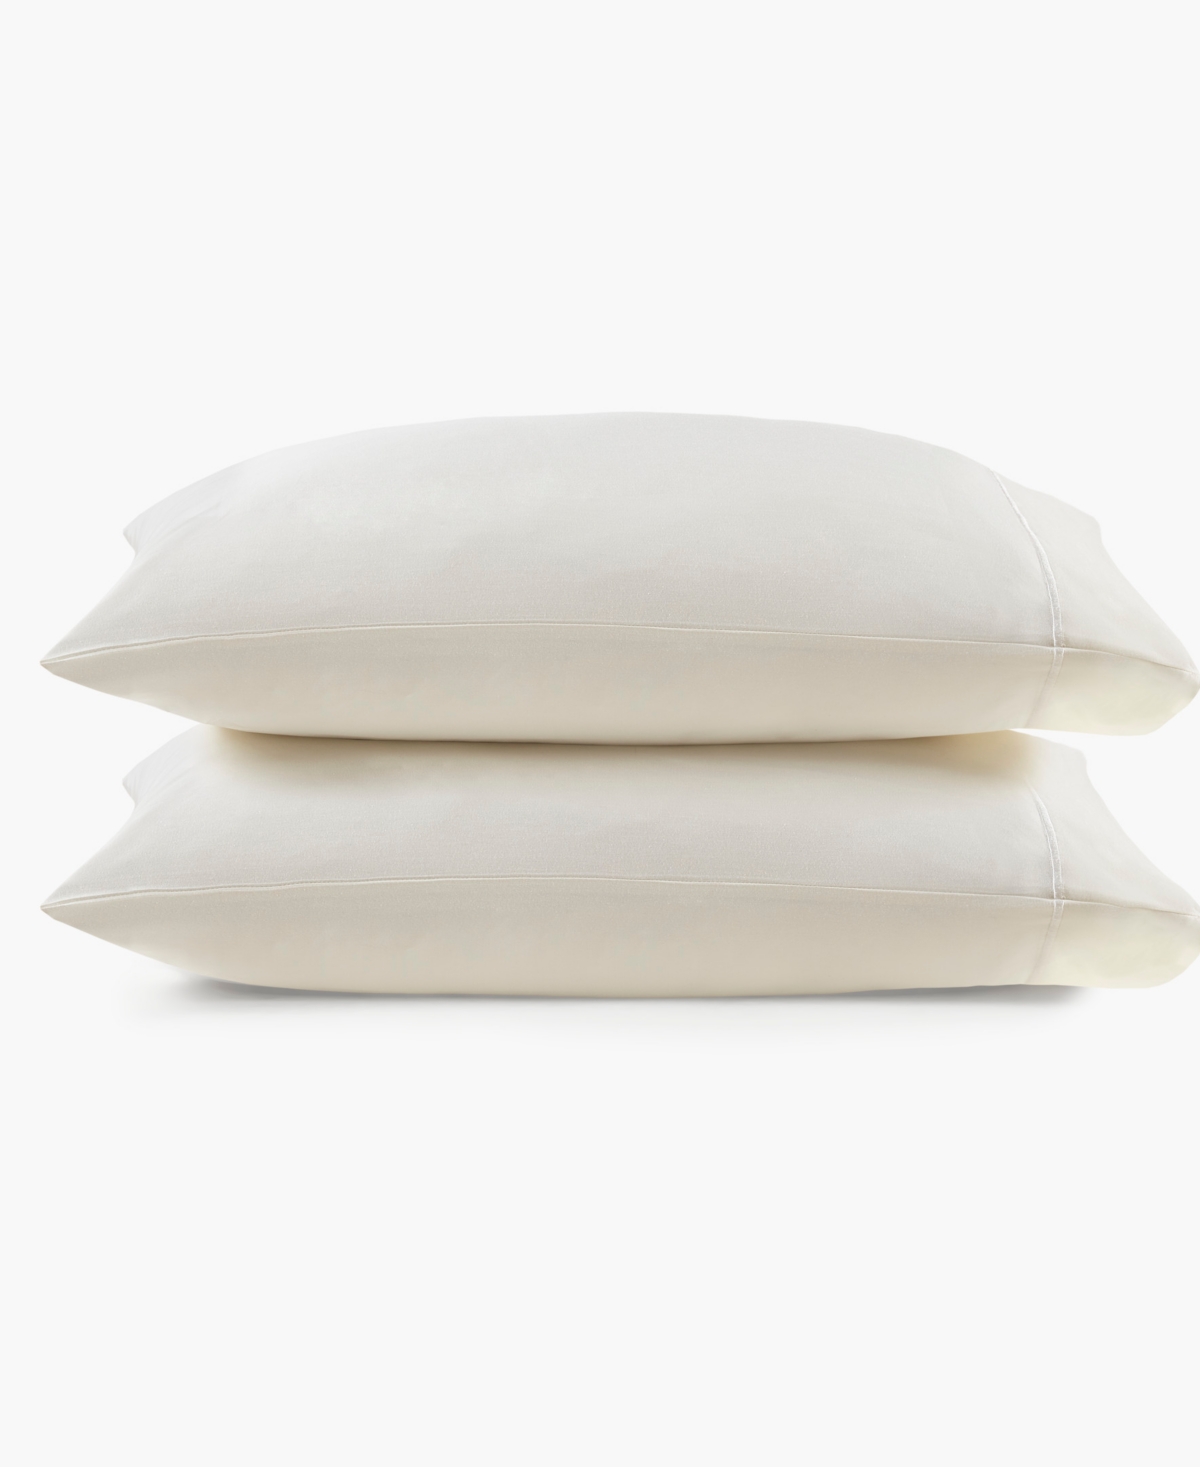 Croscill 500 Thread Count Egyptian Cotton Pillowcases, King In Ivory